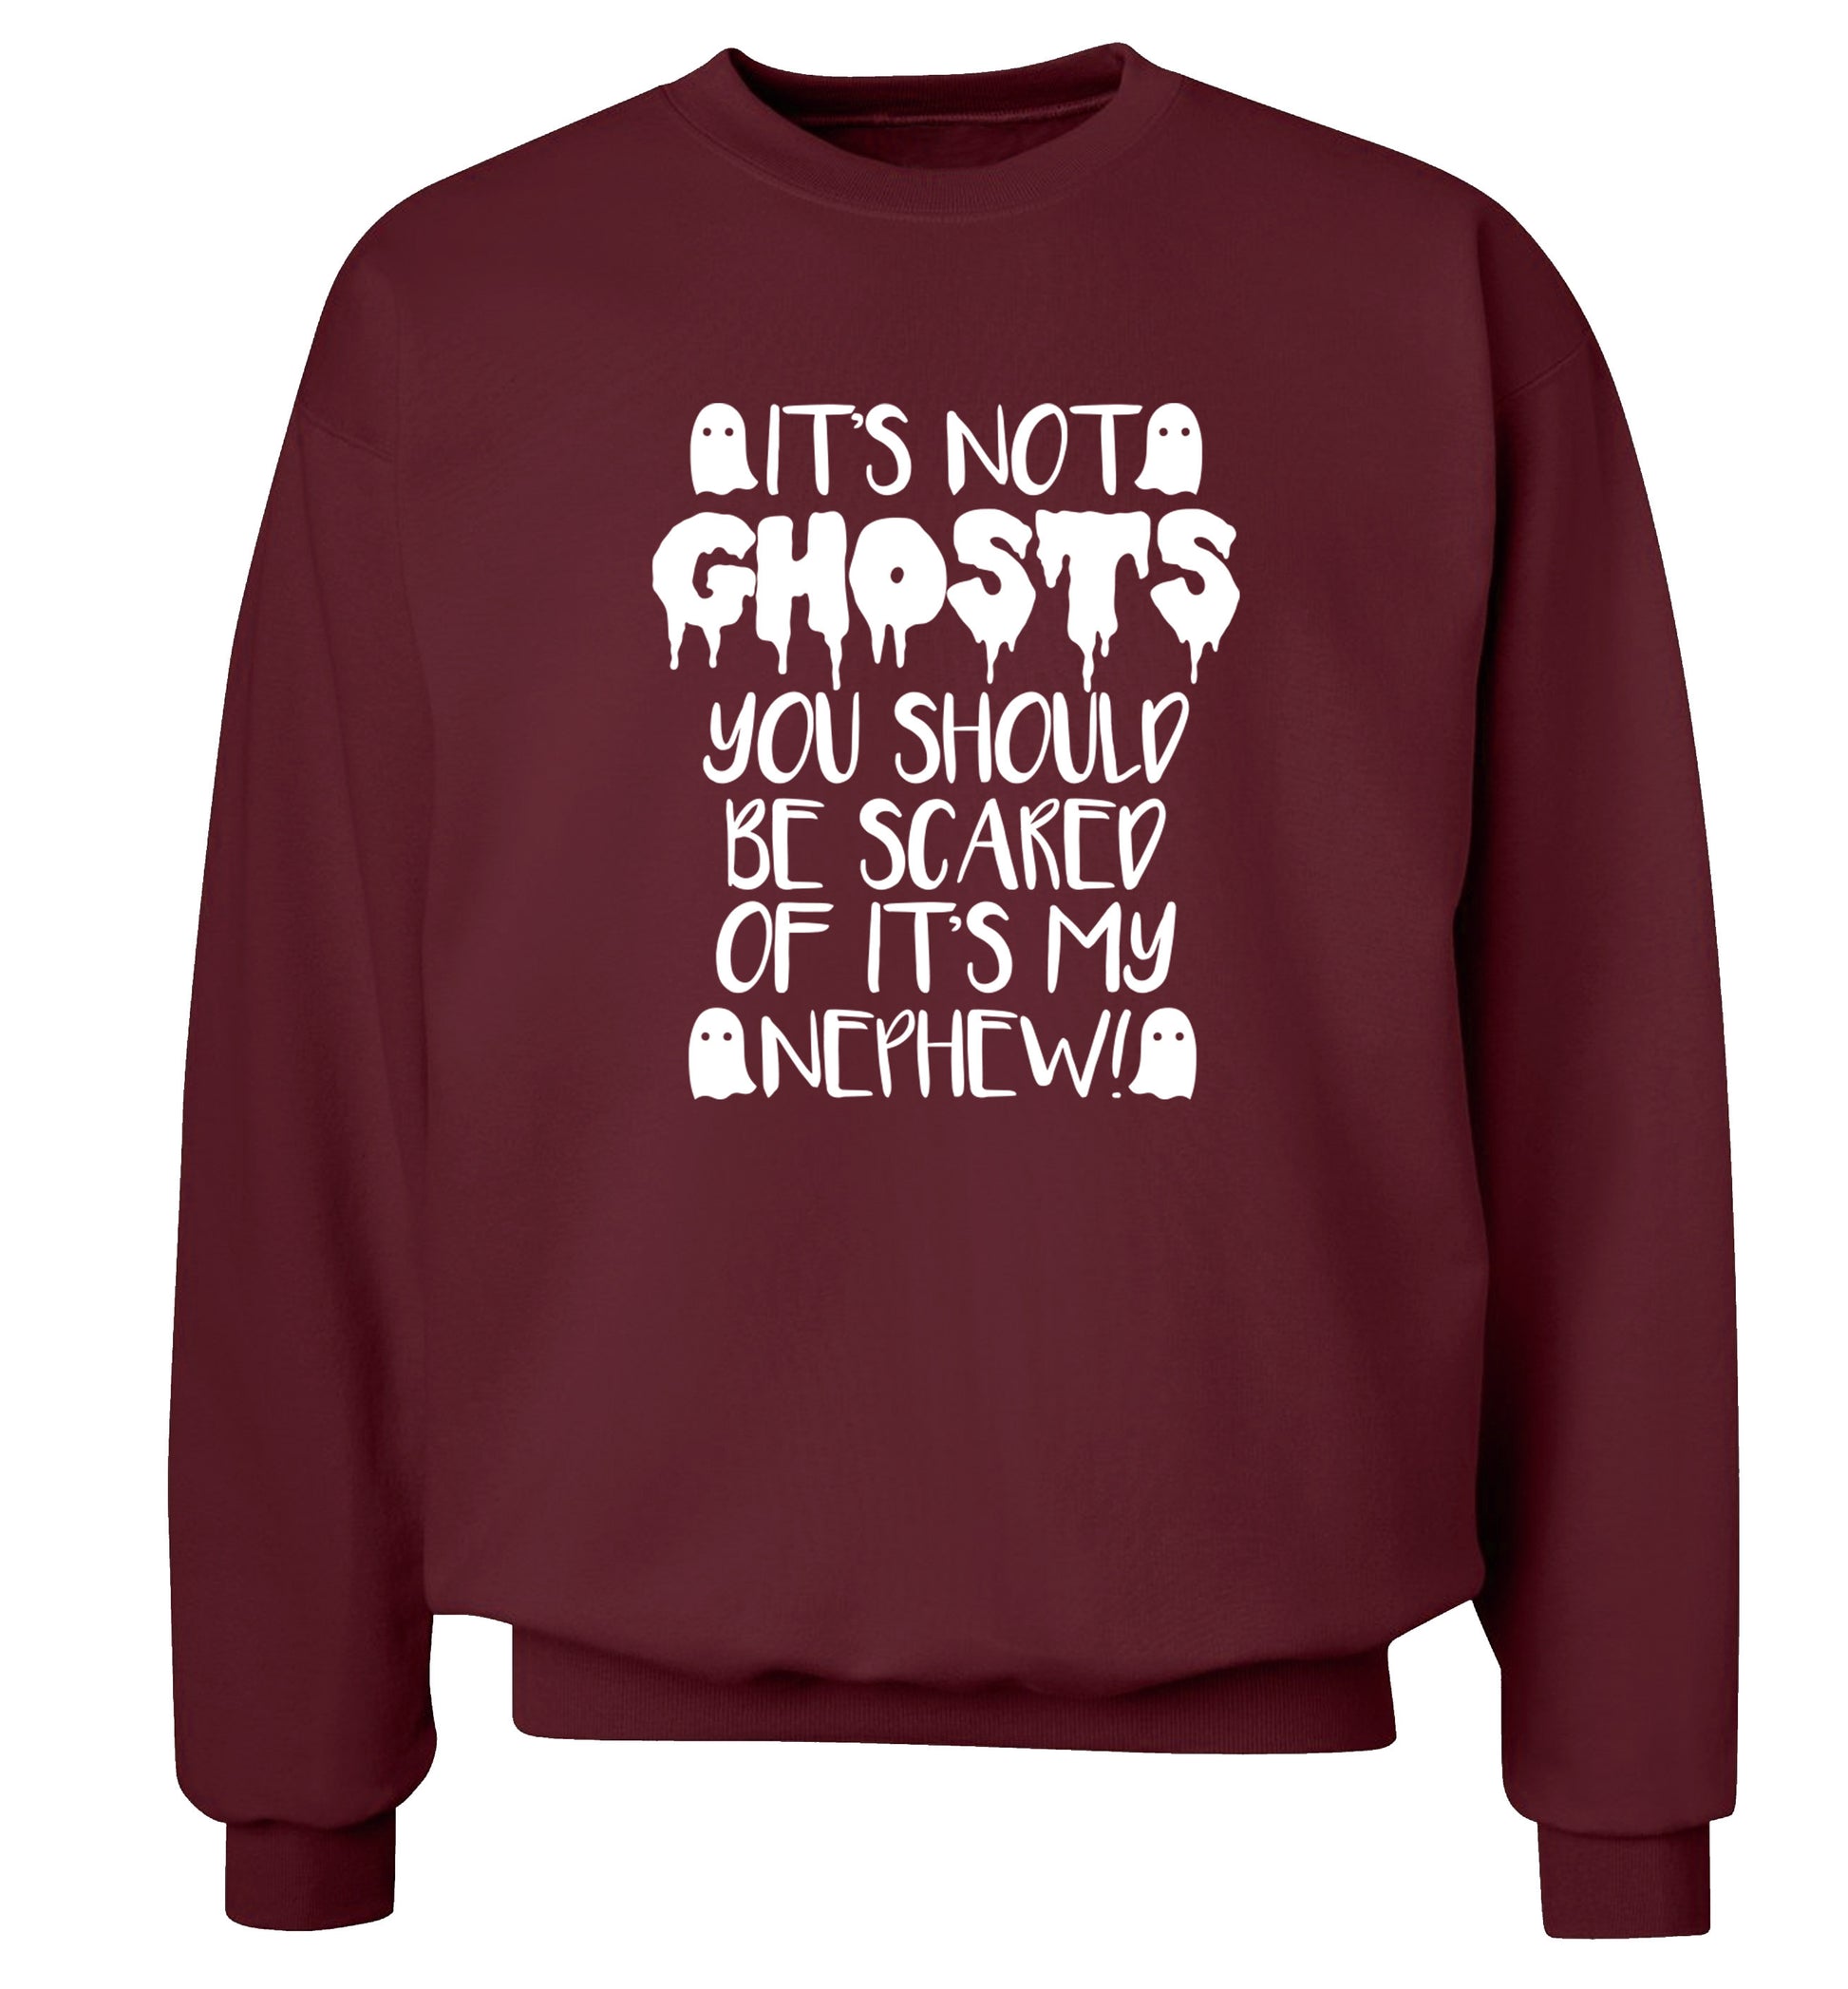 It's not ghosts you should be scared of it's my nephew! Adult's unisex maroon Sweater 2XL